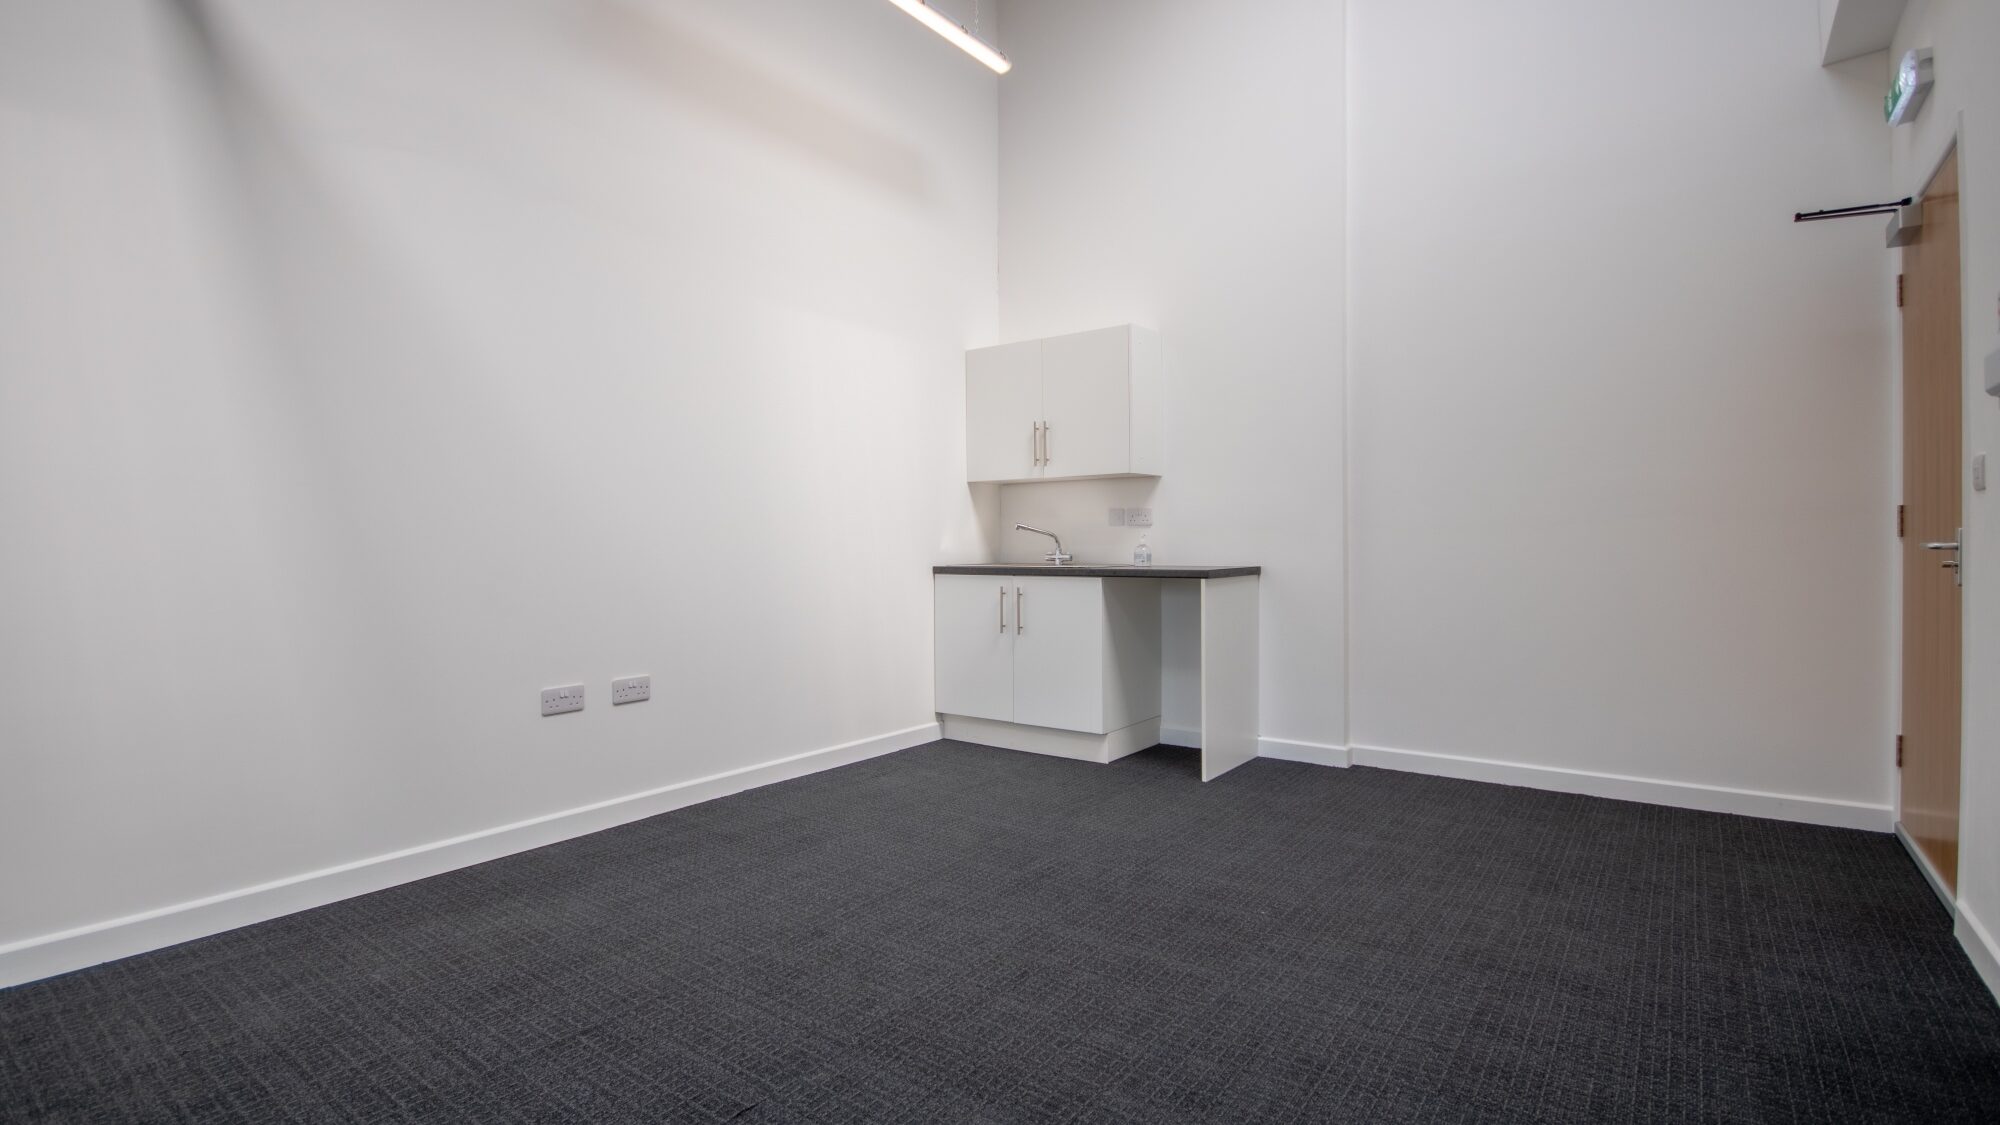 Coates H Office to Let Internal 3